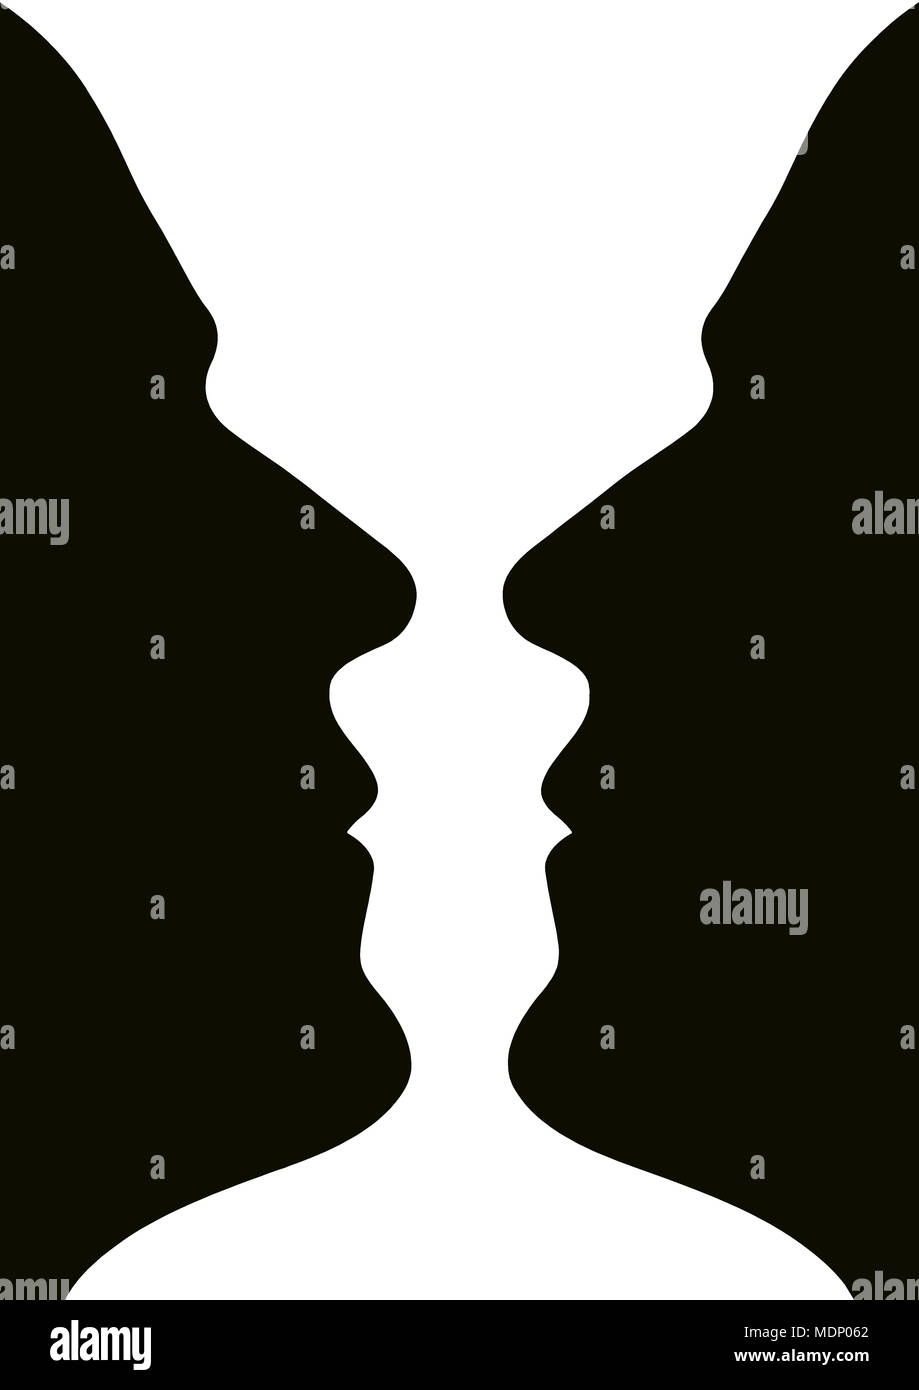 A goblet or two heads, vector illustration of an optical illusion Stock Photo